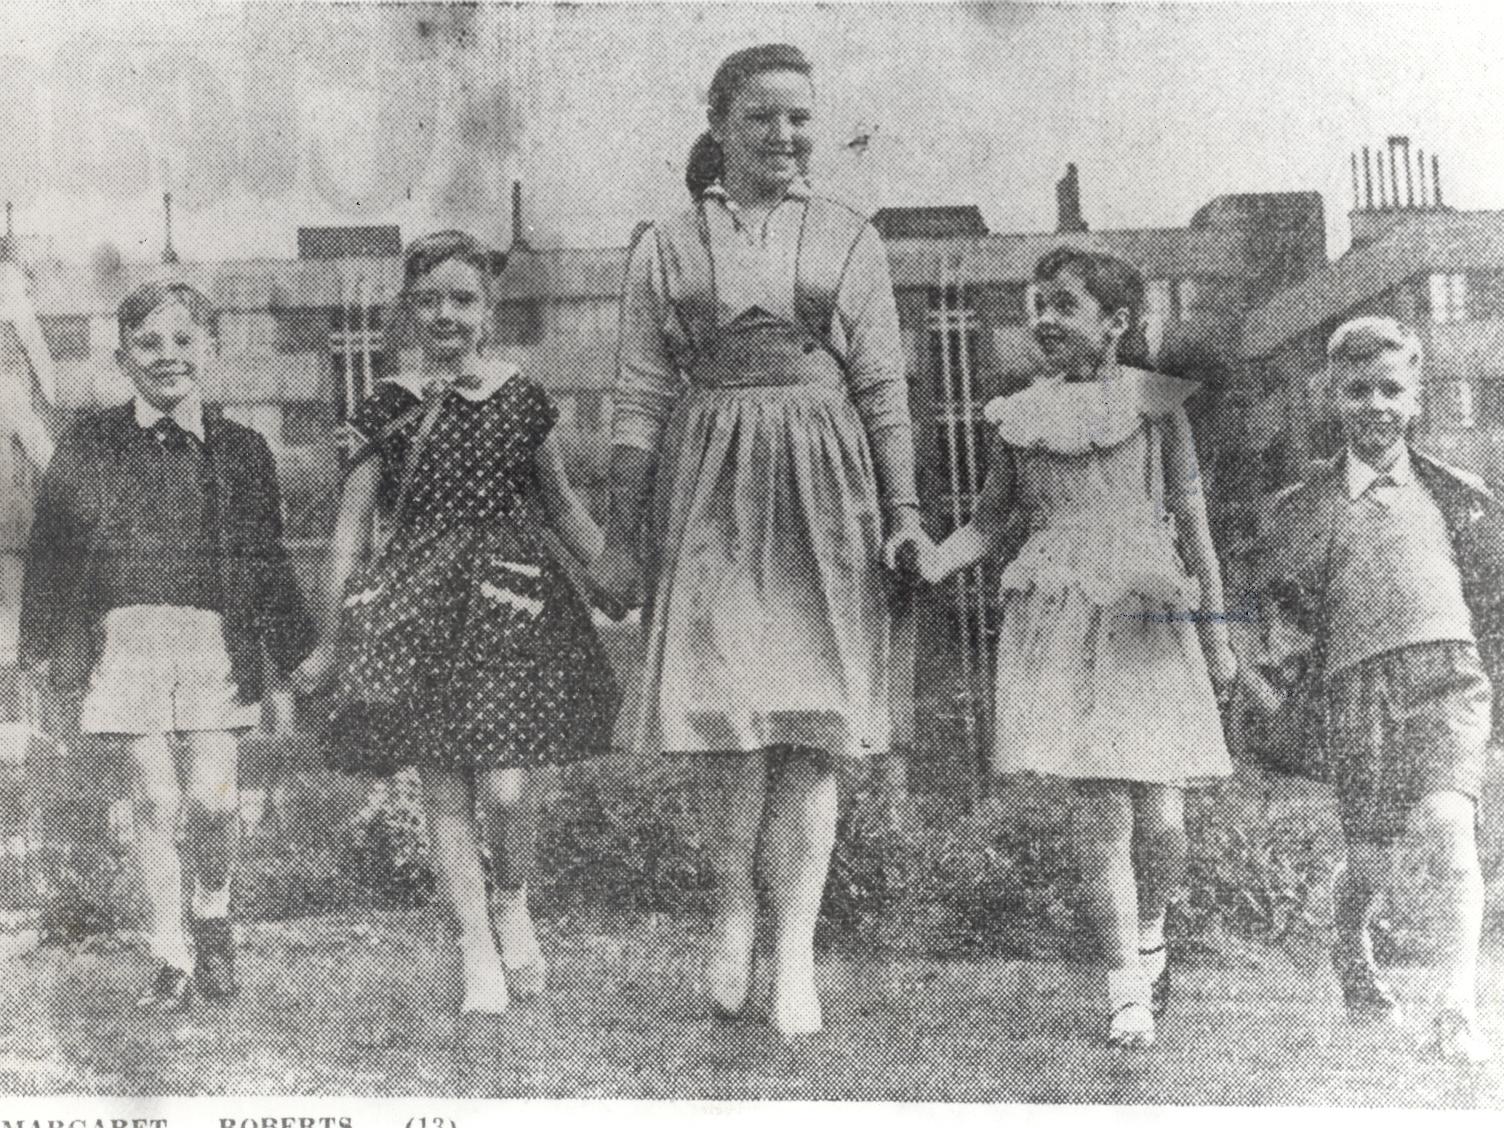 Pictured is Margaret Roberts in a photo which appeared in the YEP in May 1959 when she was only 13. She was chosen as Quarry Hill Flats Tenants' Association gala queen for that year.